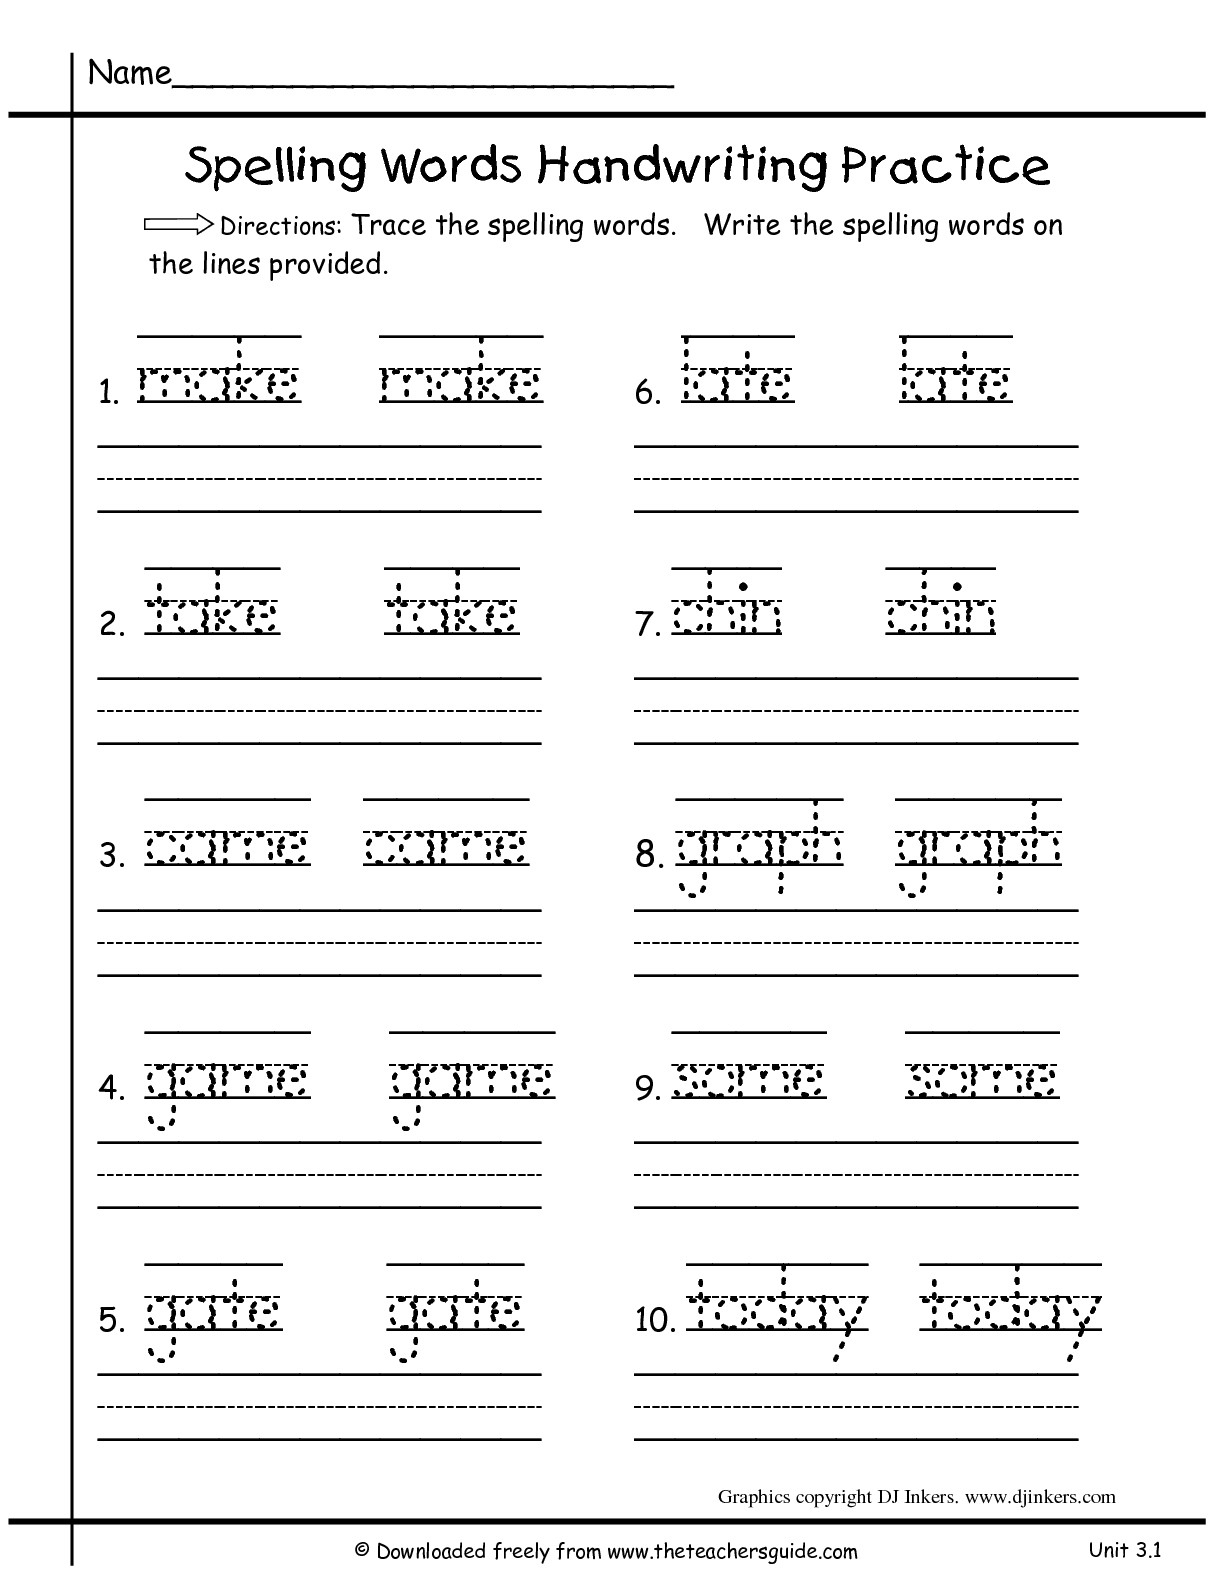 Printable Writing Sheets For First Graders - 6.14.hus-Noorderpad.de • - Free Printable Writing Sheets